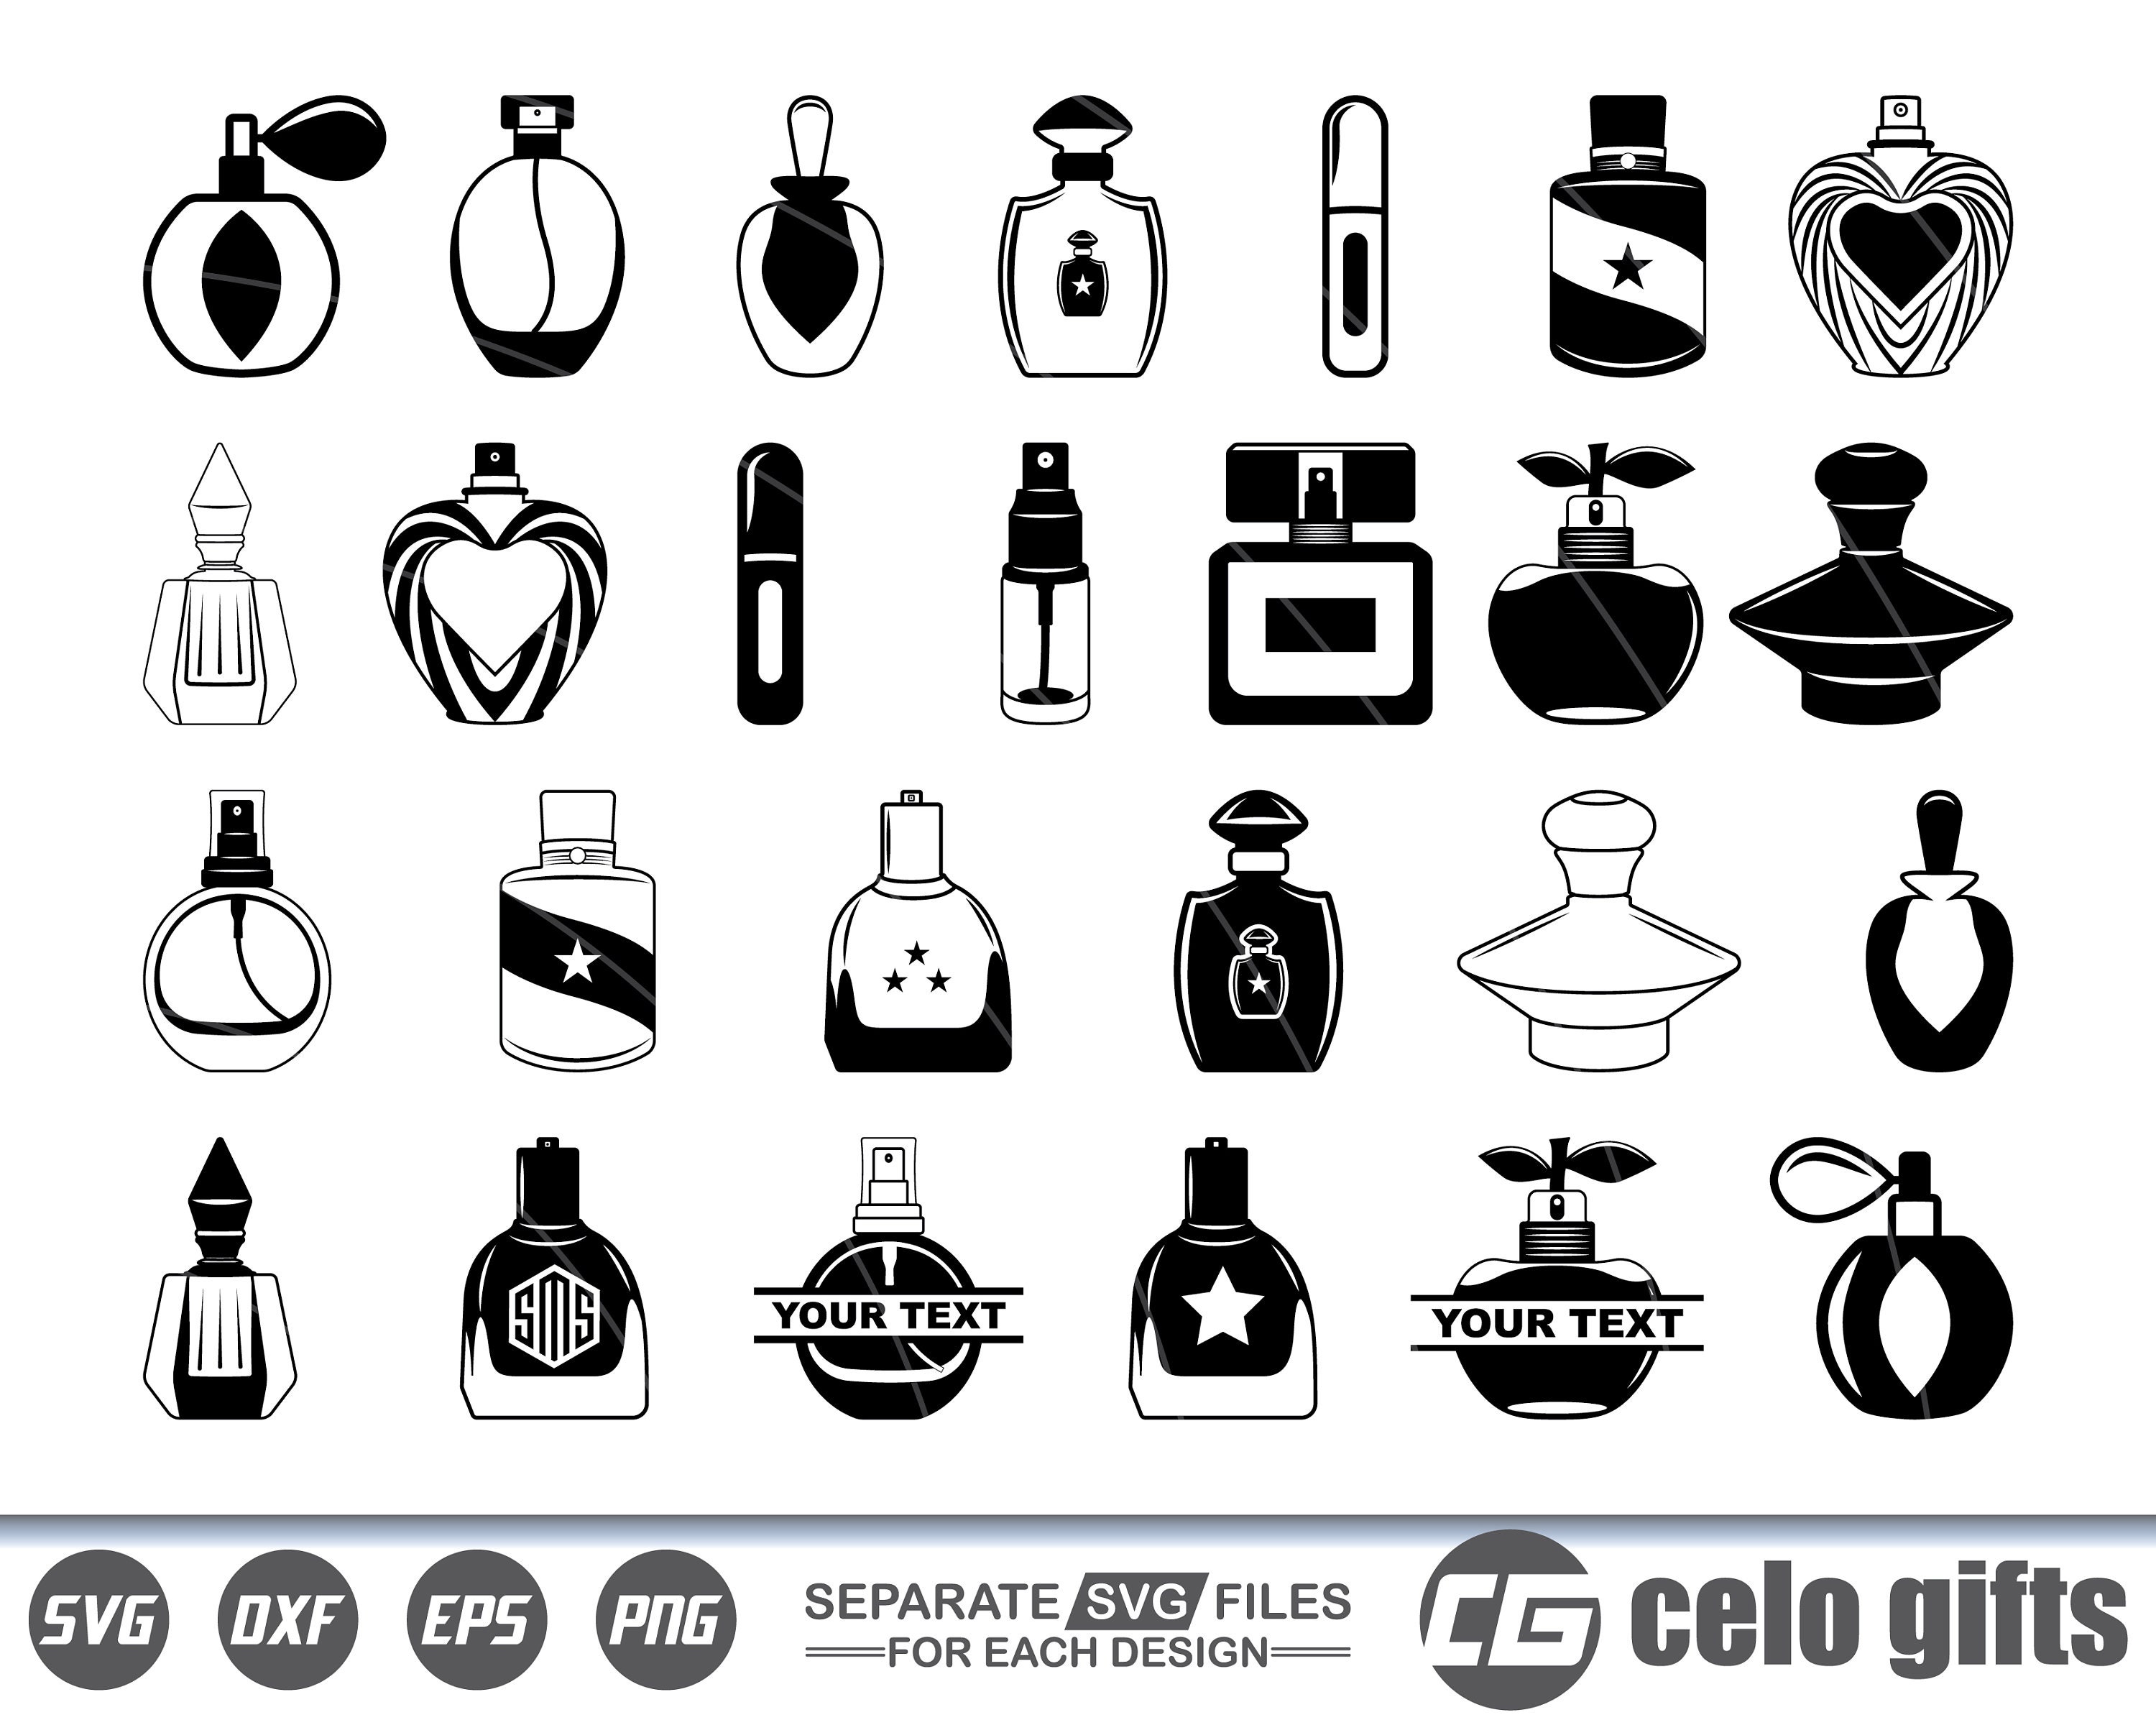 Perfume Bottle Bundle Graphic by inappropriateSVGs · Creative Fabrica